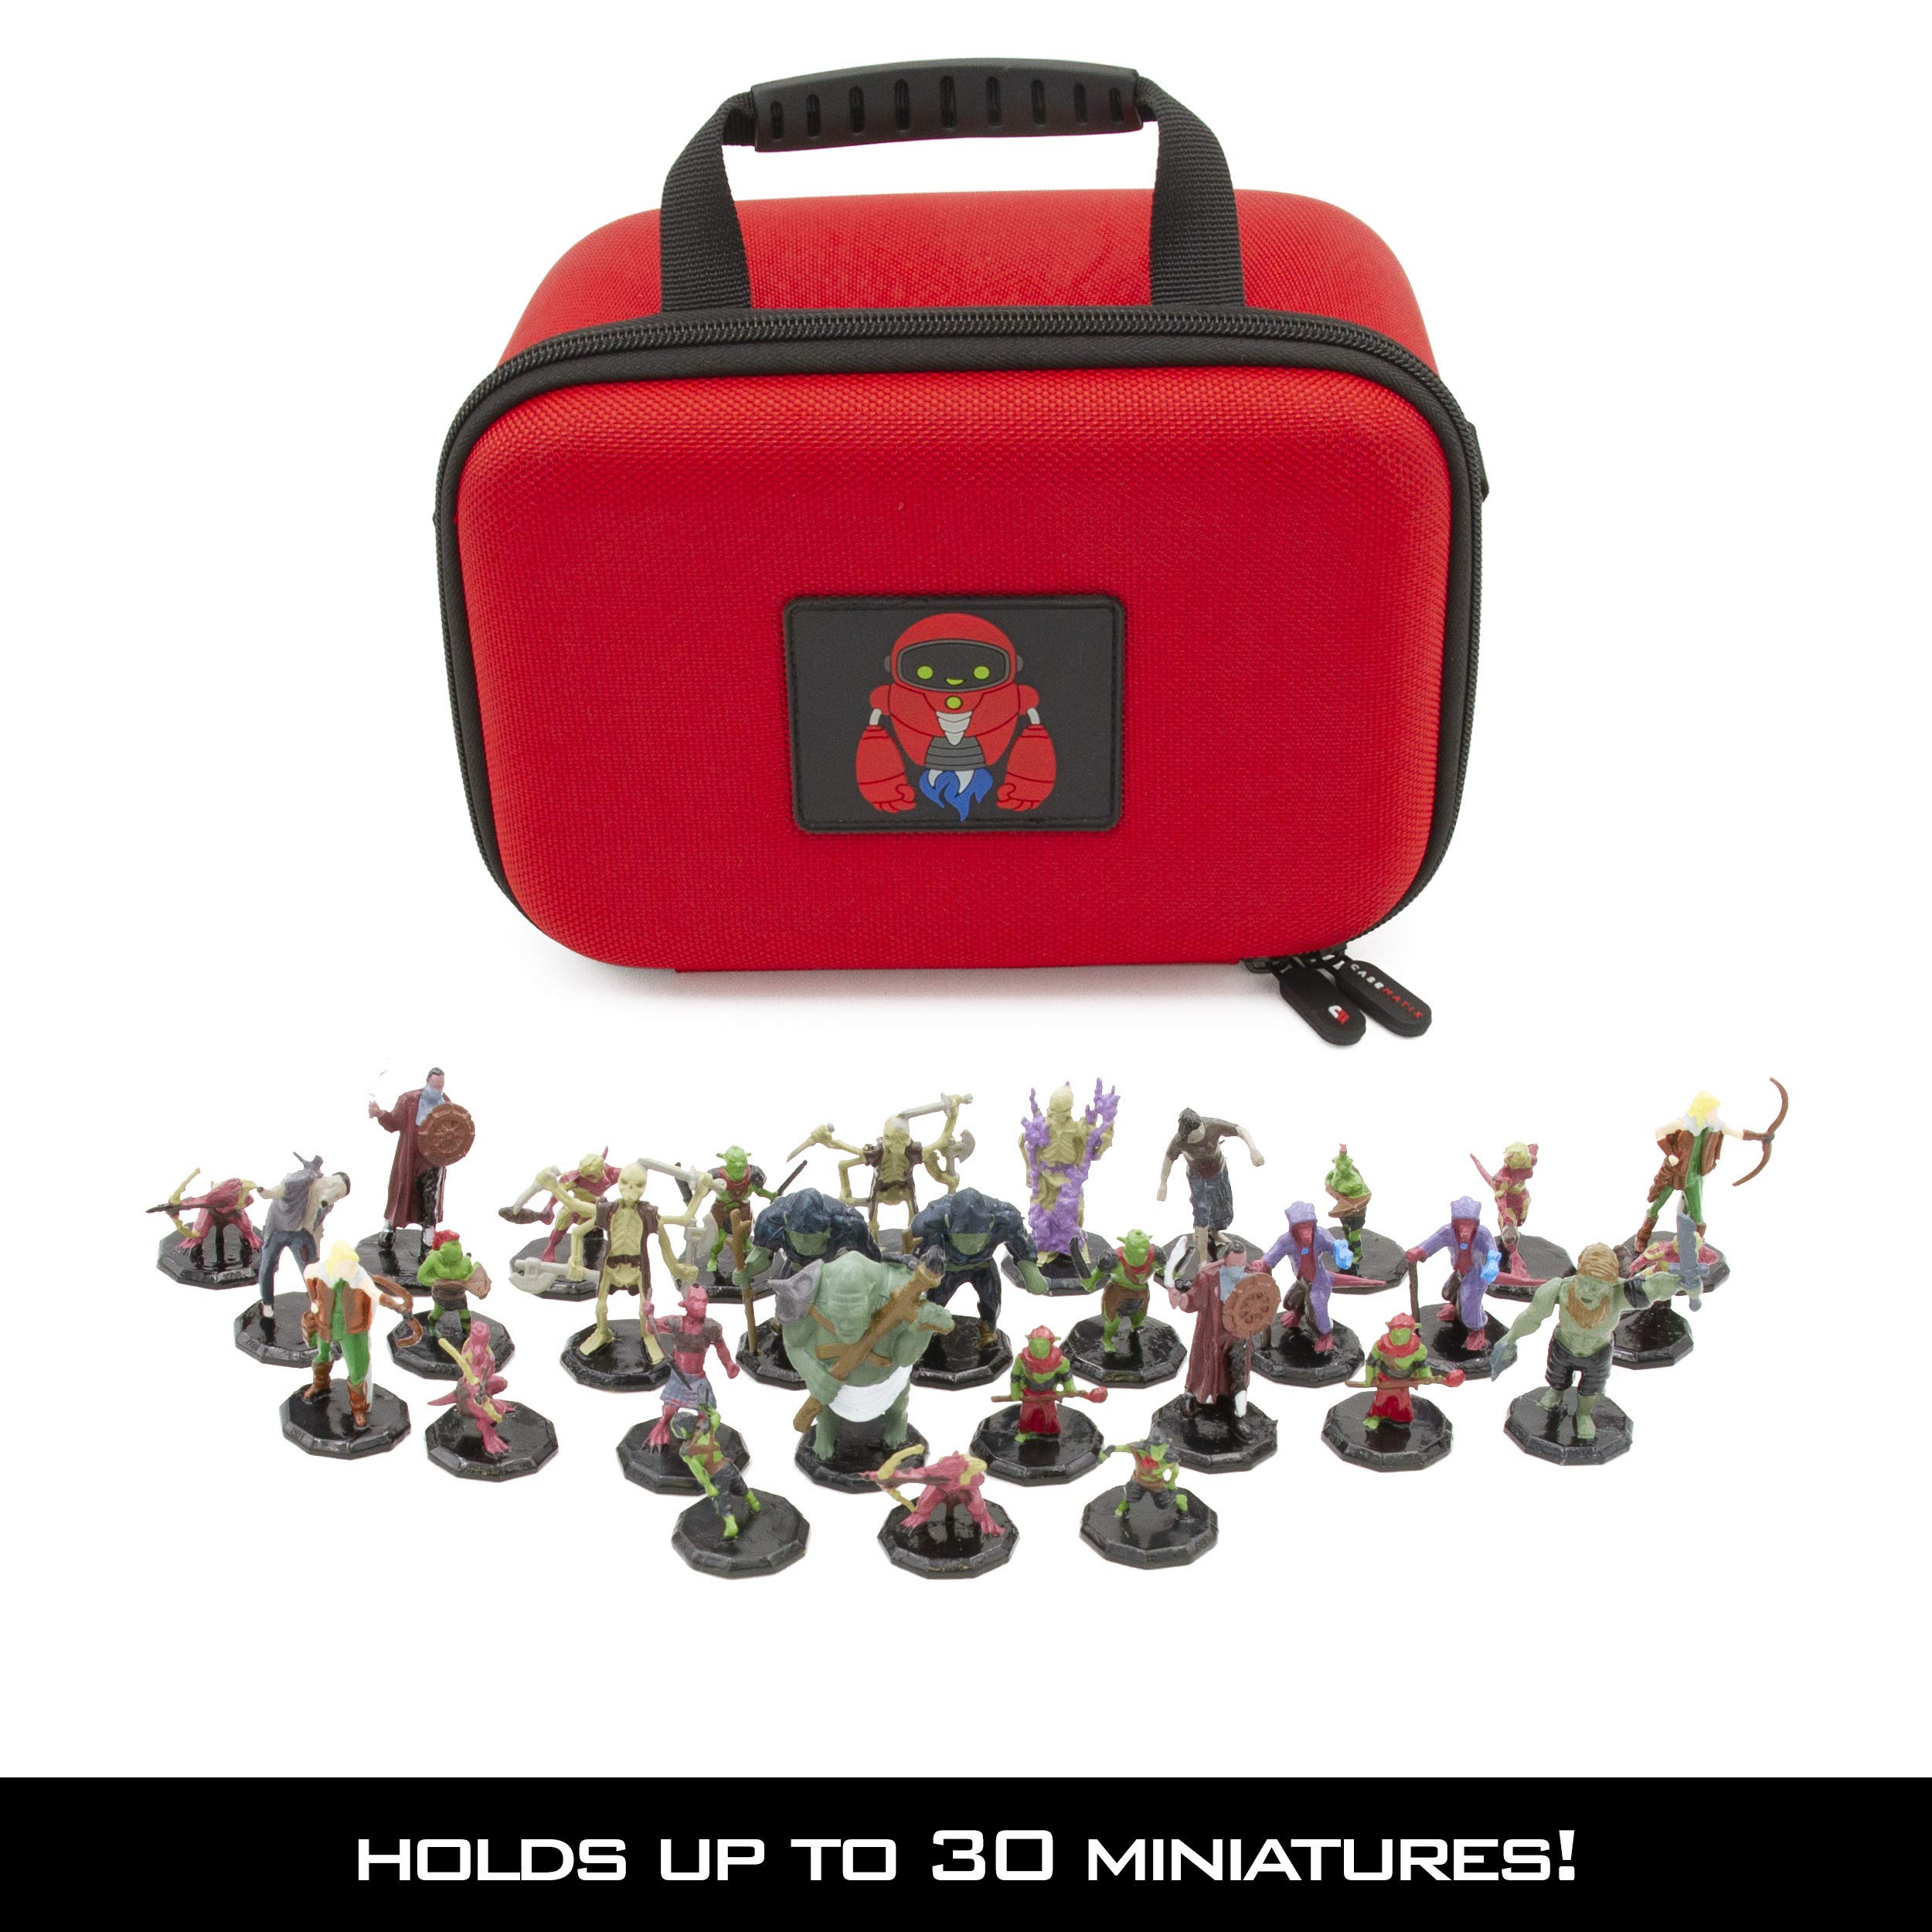 CASEMATIX Miniature Storage Hard Shell Figure Case - 30 Slot Figurine Carrying Case with Adjustable Shoulder Strap and Accessory Storage for Warhammer 40k, DND and More, Red